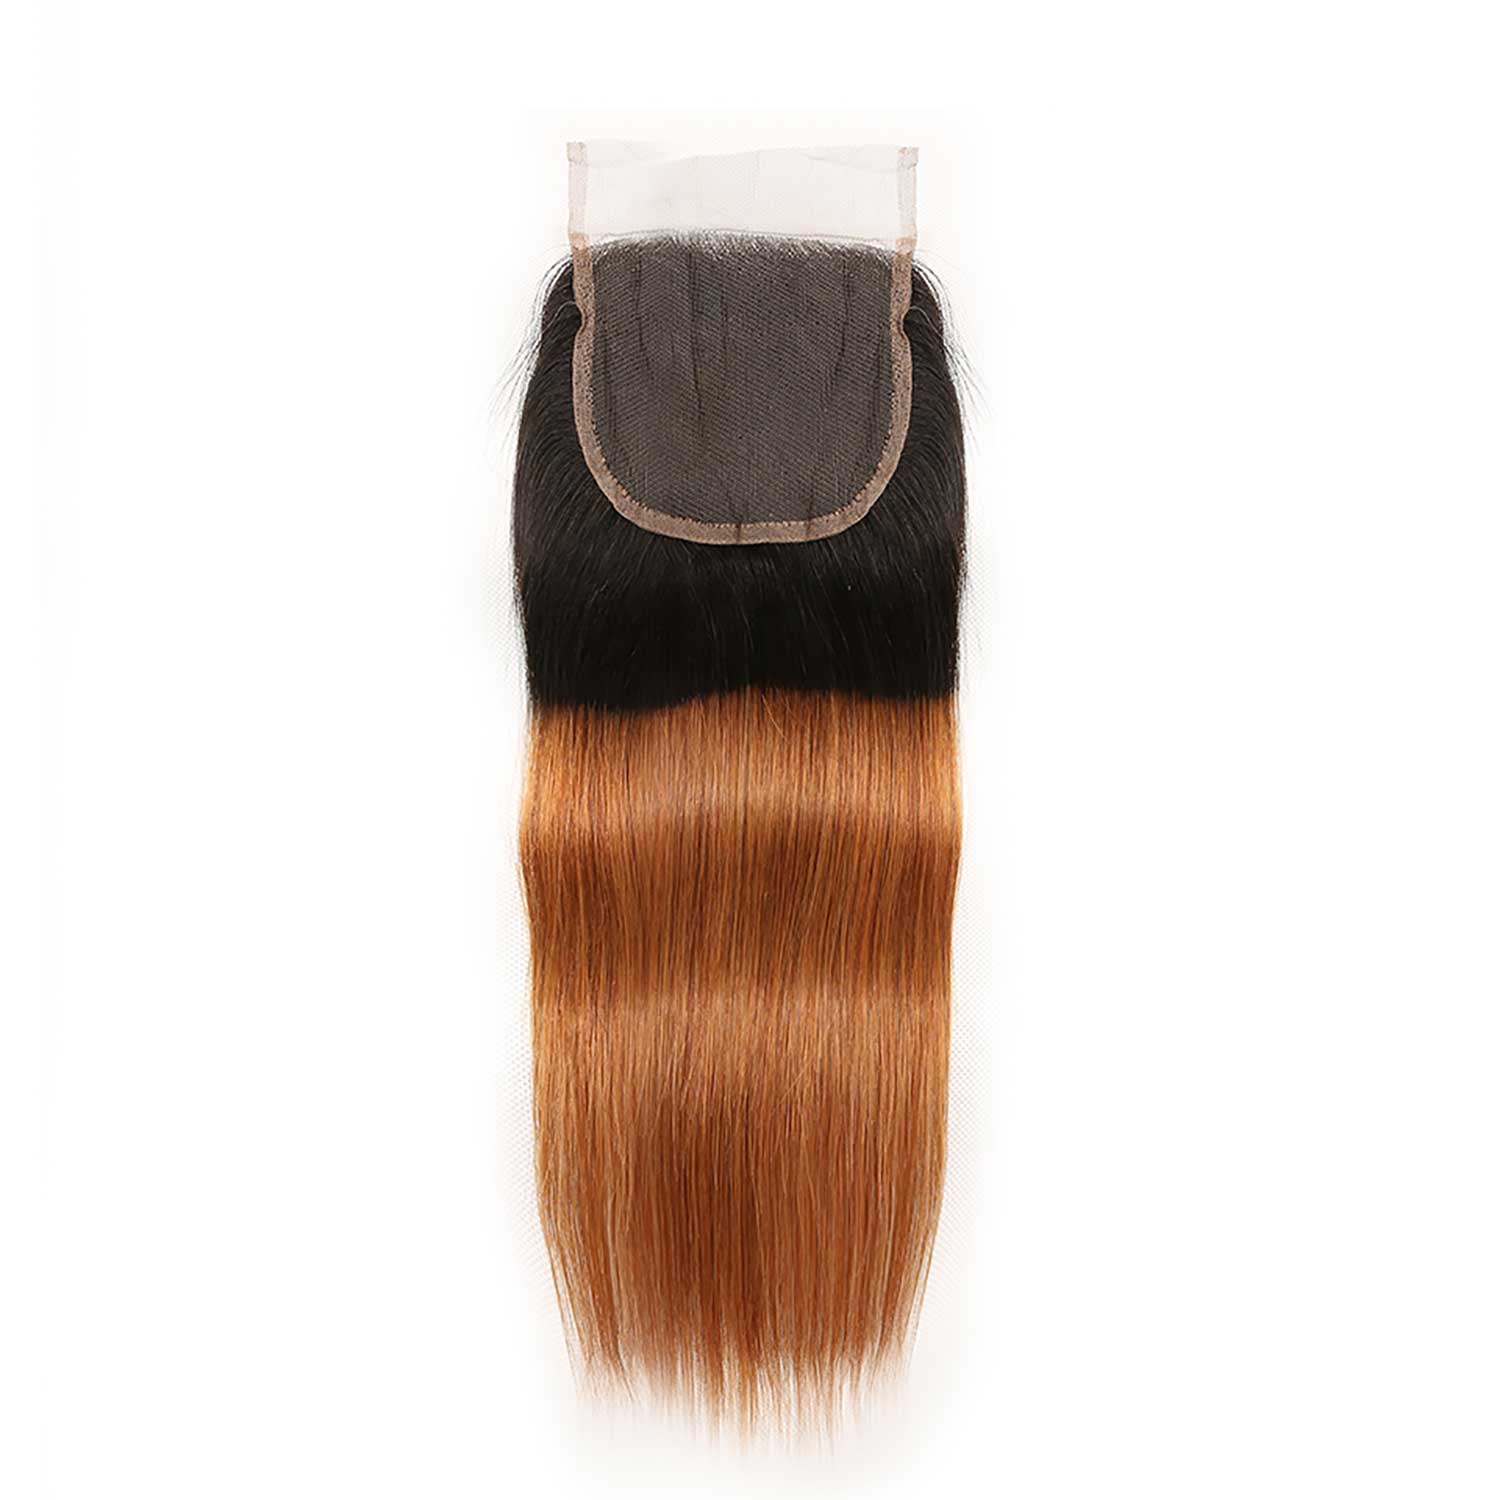 Ombre Human Hair 4x4 Lace Closure with Dark Roots